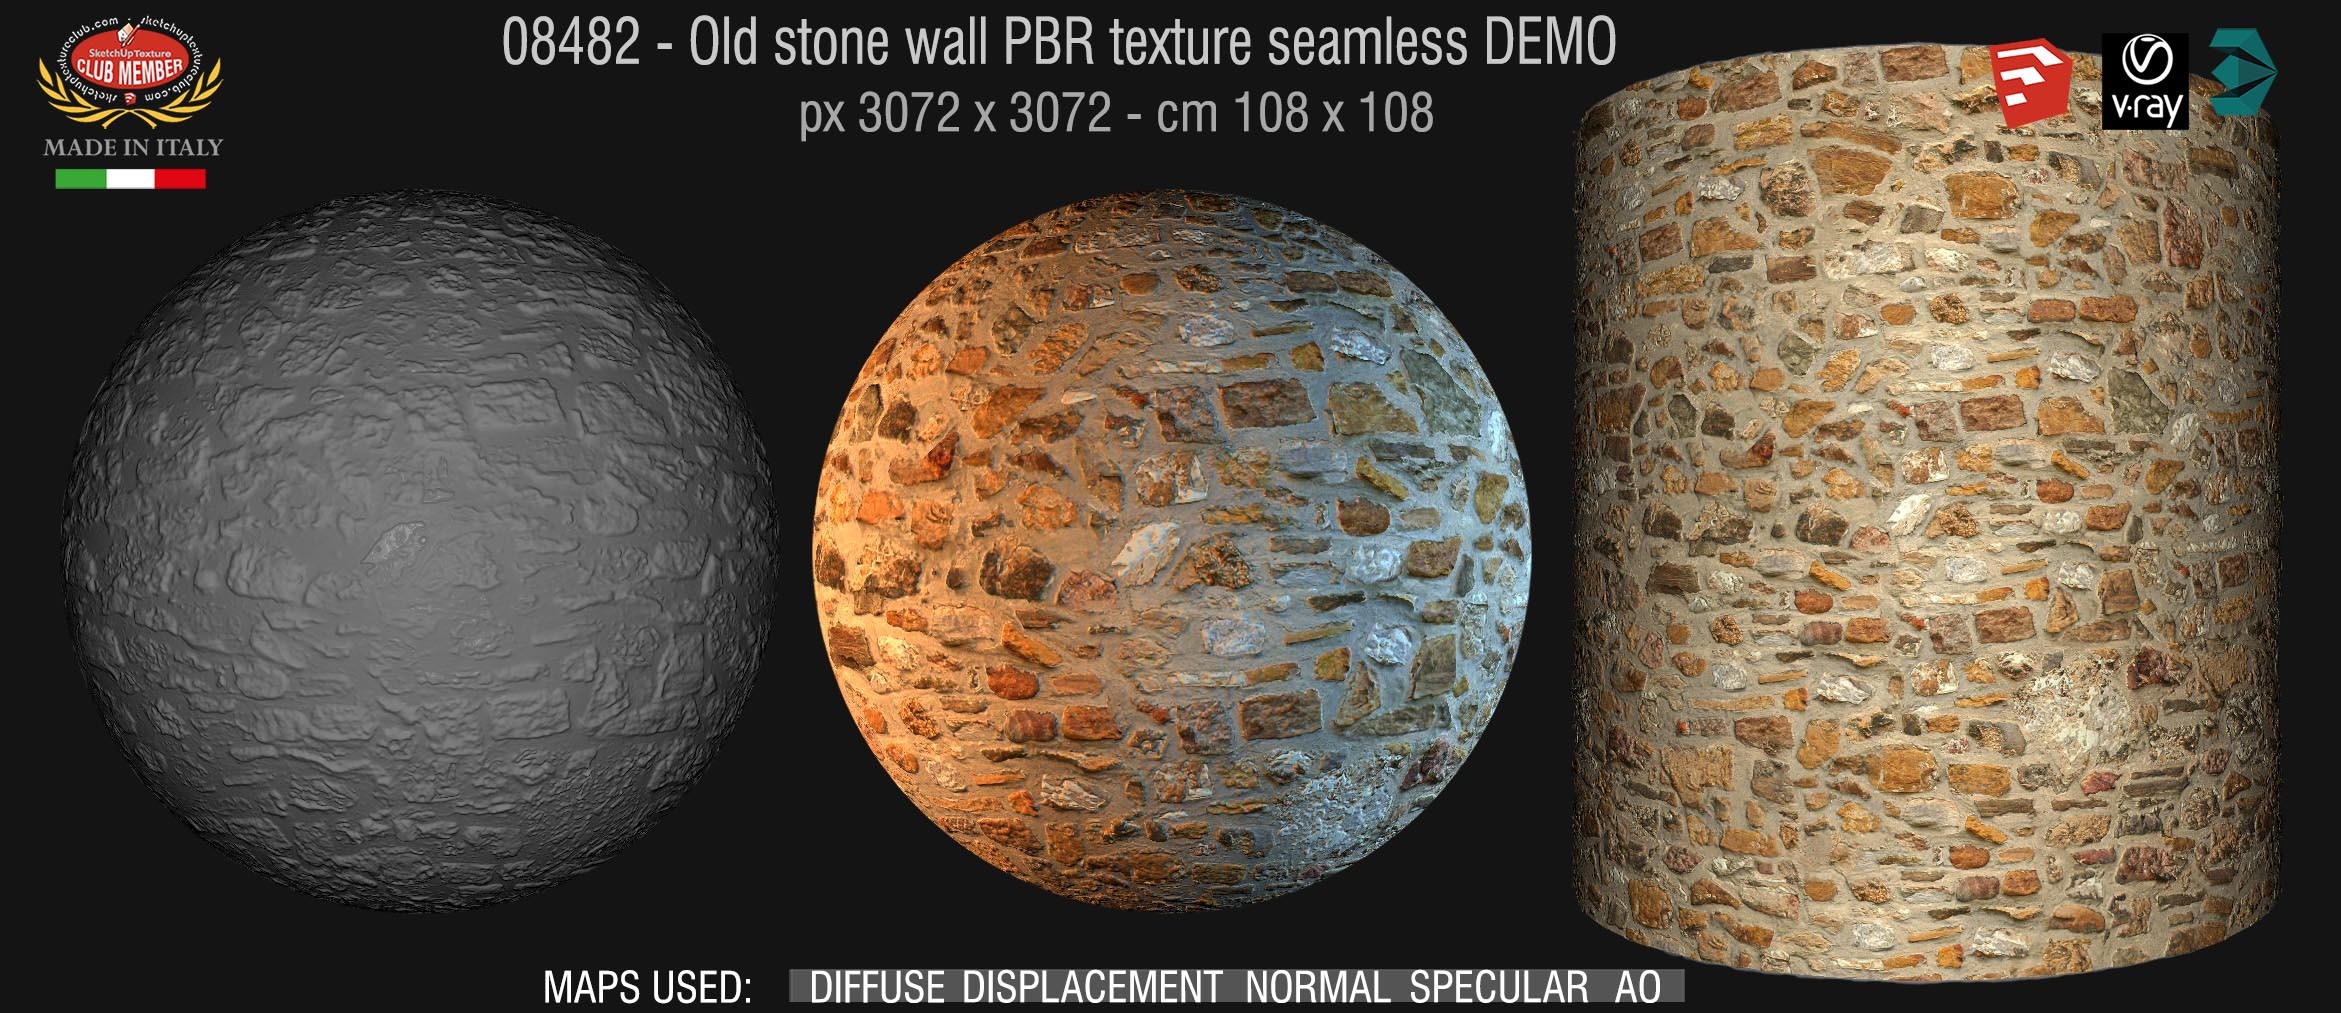 08482 Old stone wall PBR texture seamless DEMO